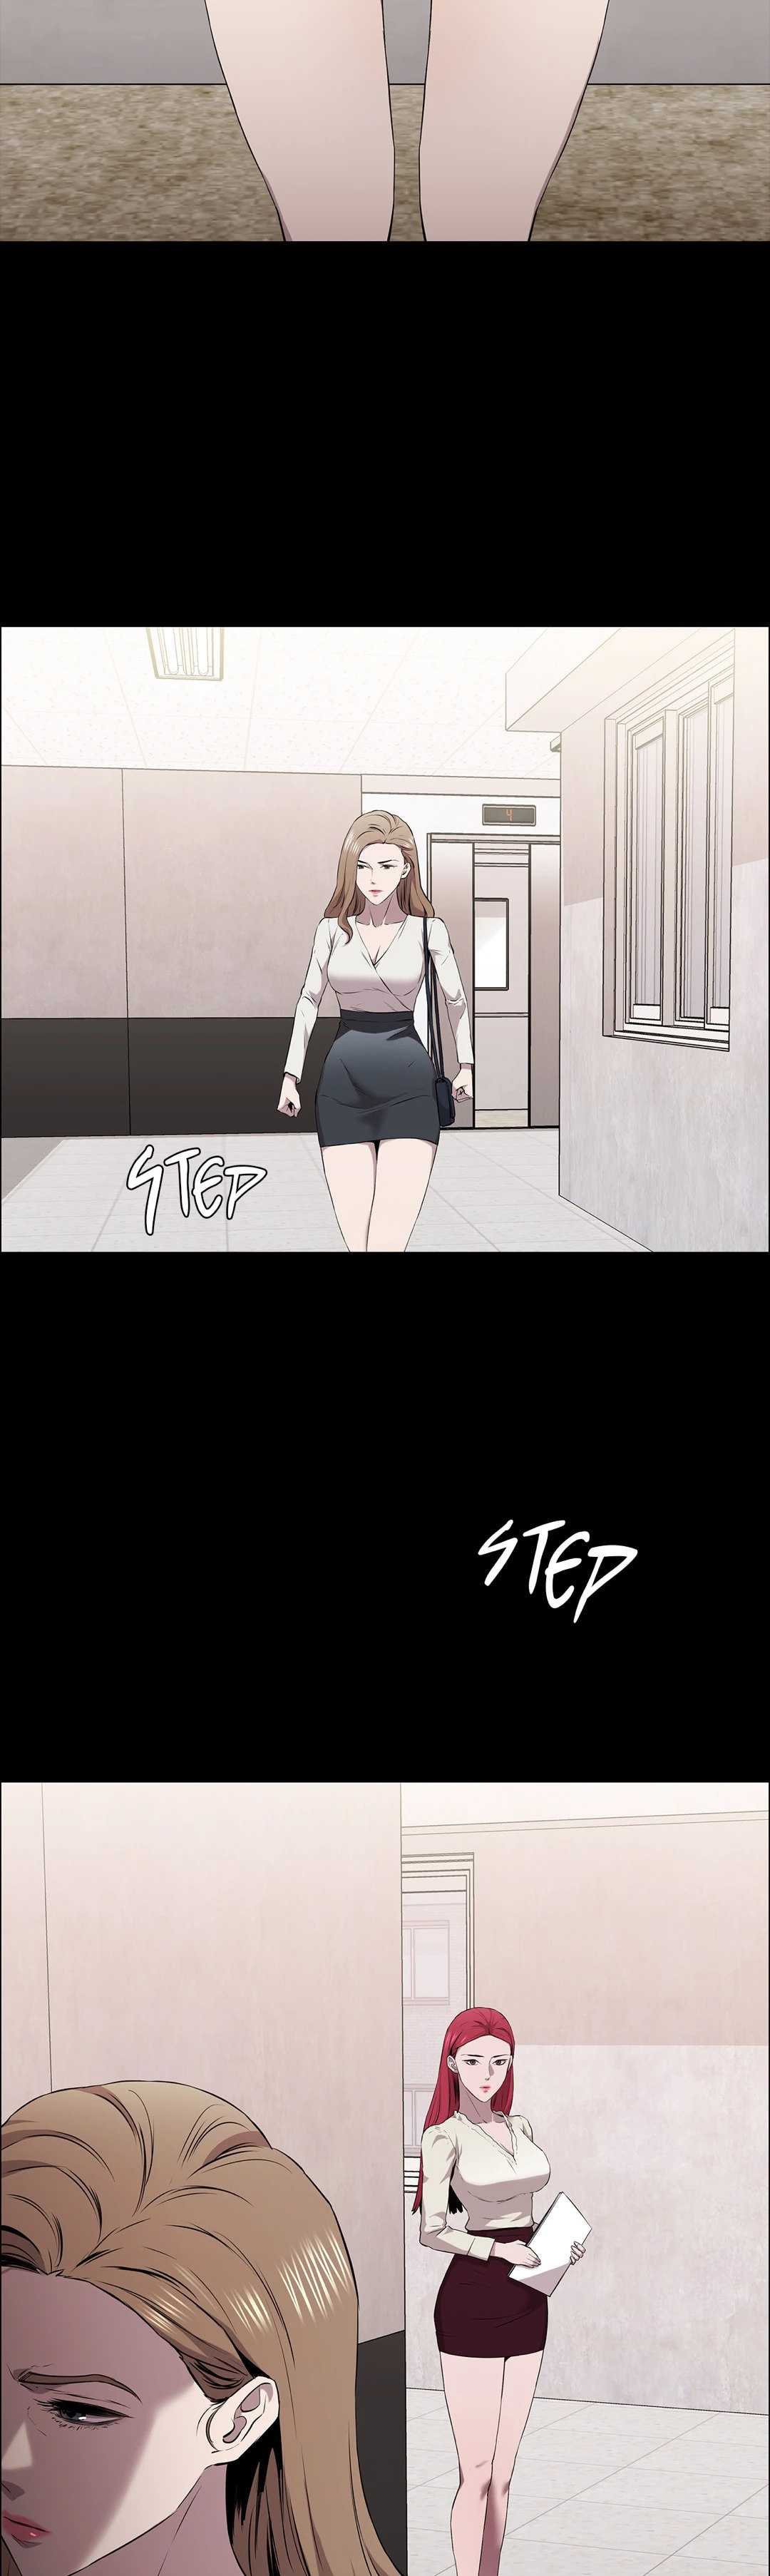 Thorns on Innocence - Chapter 11 Page 2